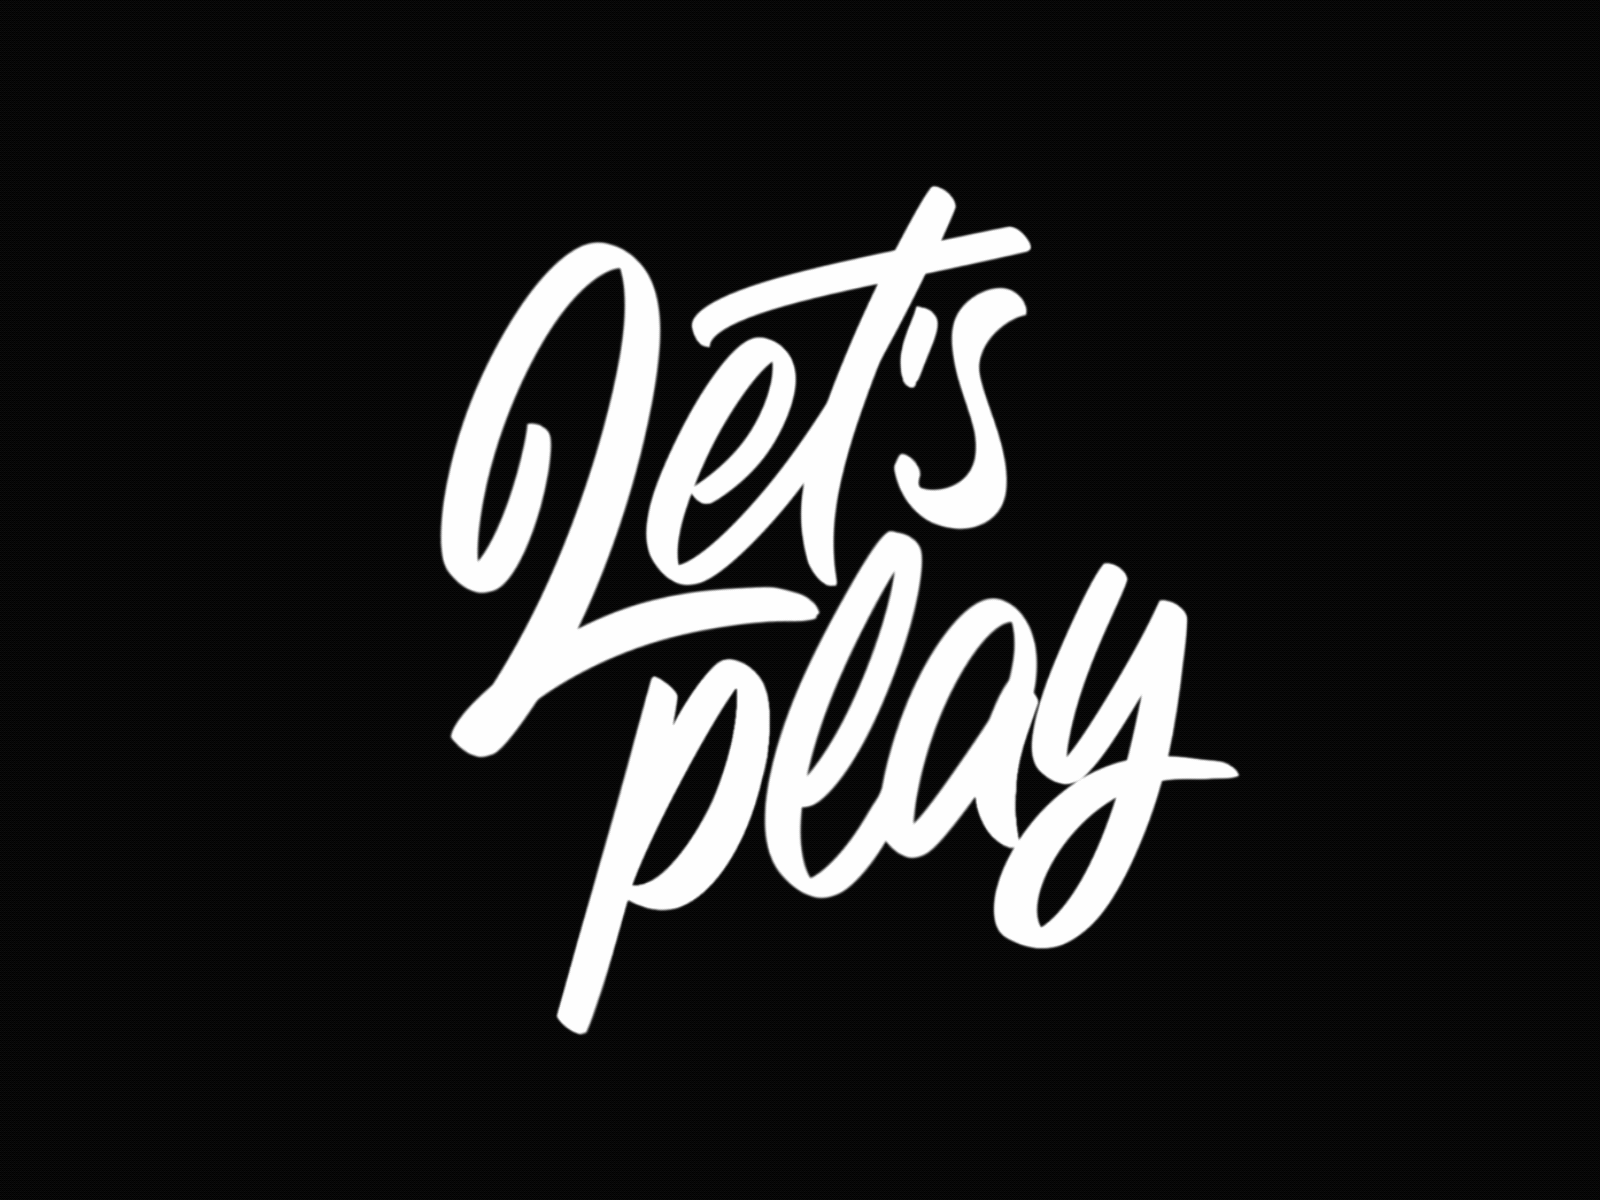 Let’s play. Lettering calligraphy